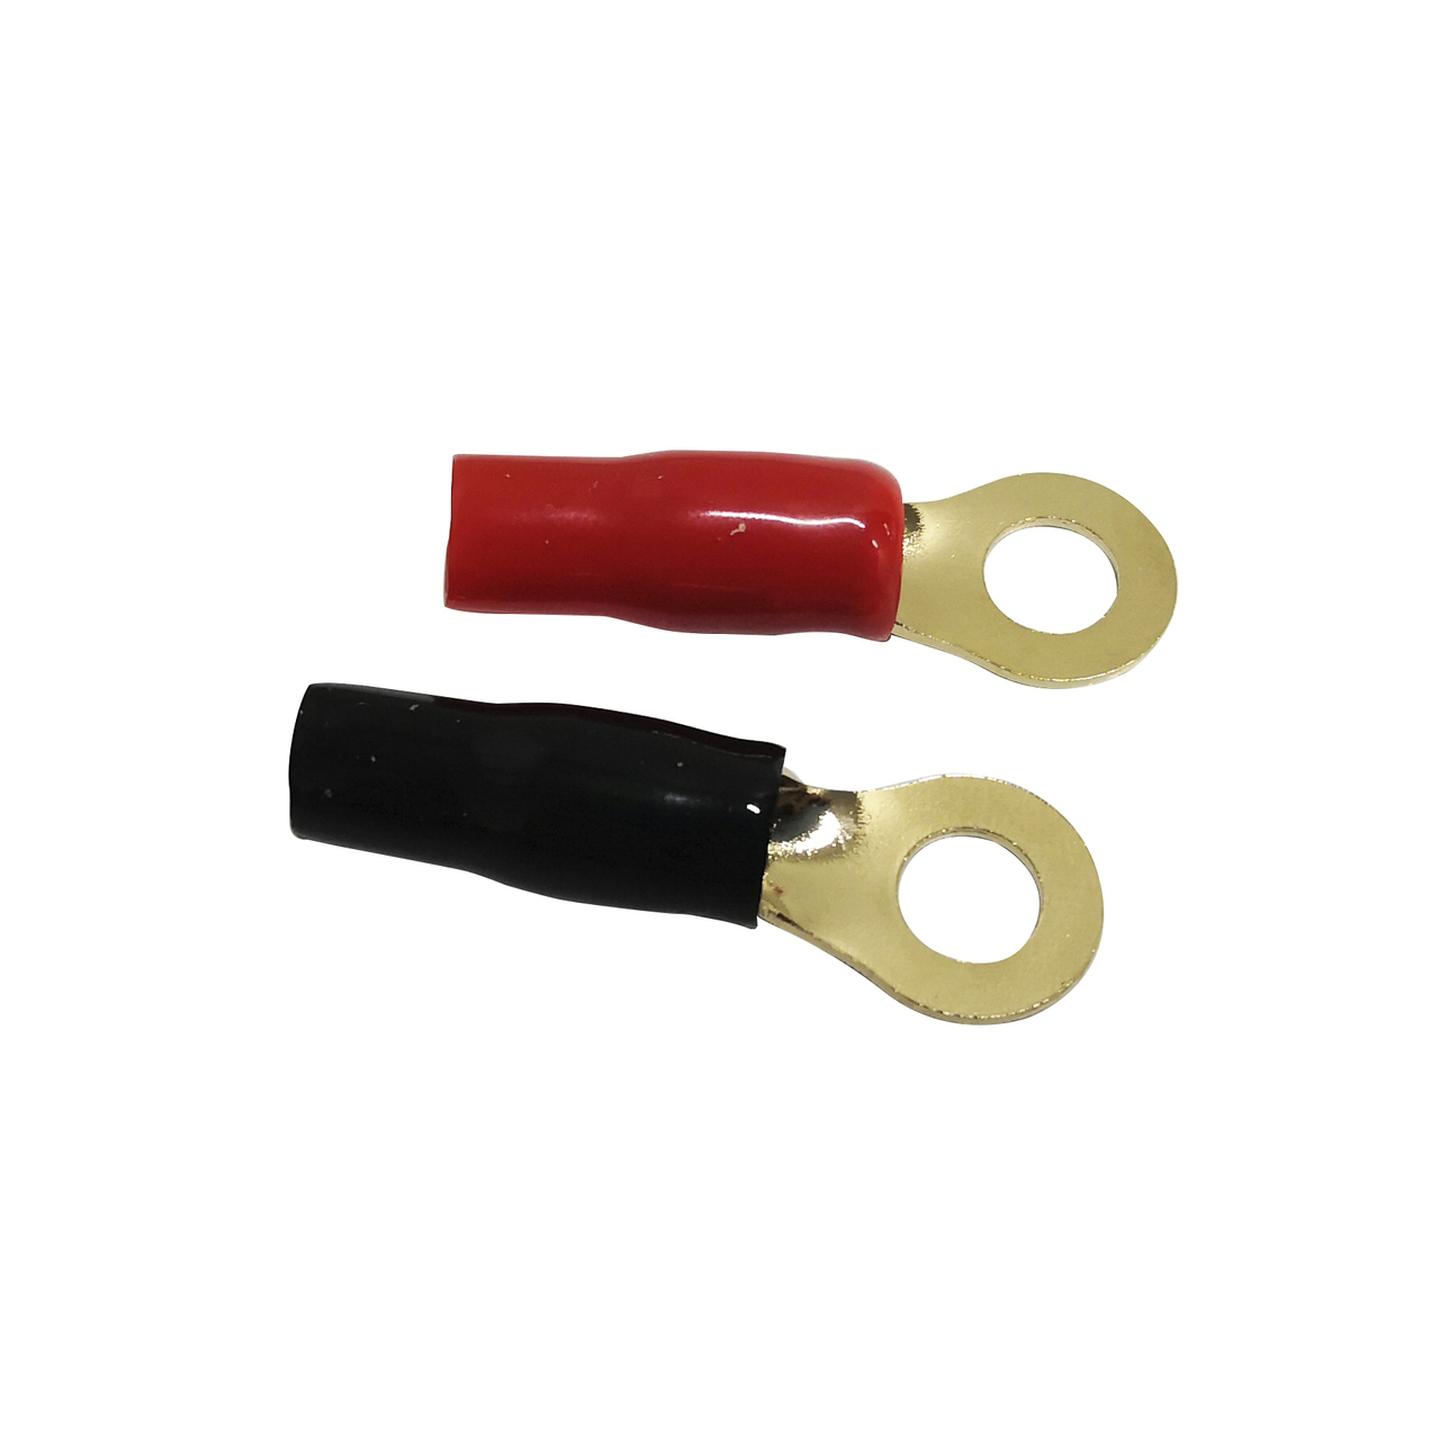 Red and Black Gold Crimp Cable Small Eye Terminals - Pack of 2